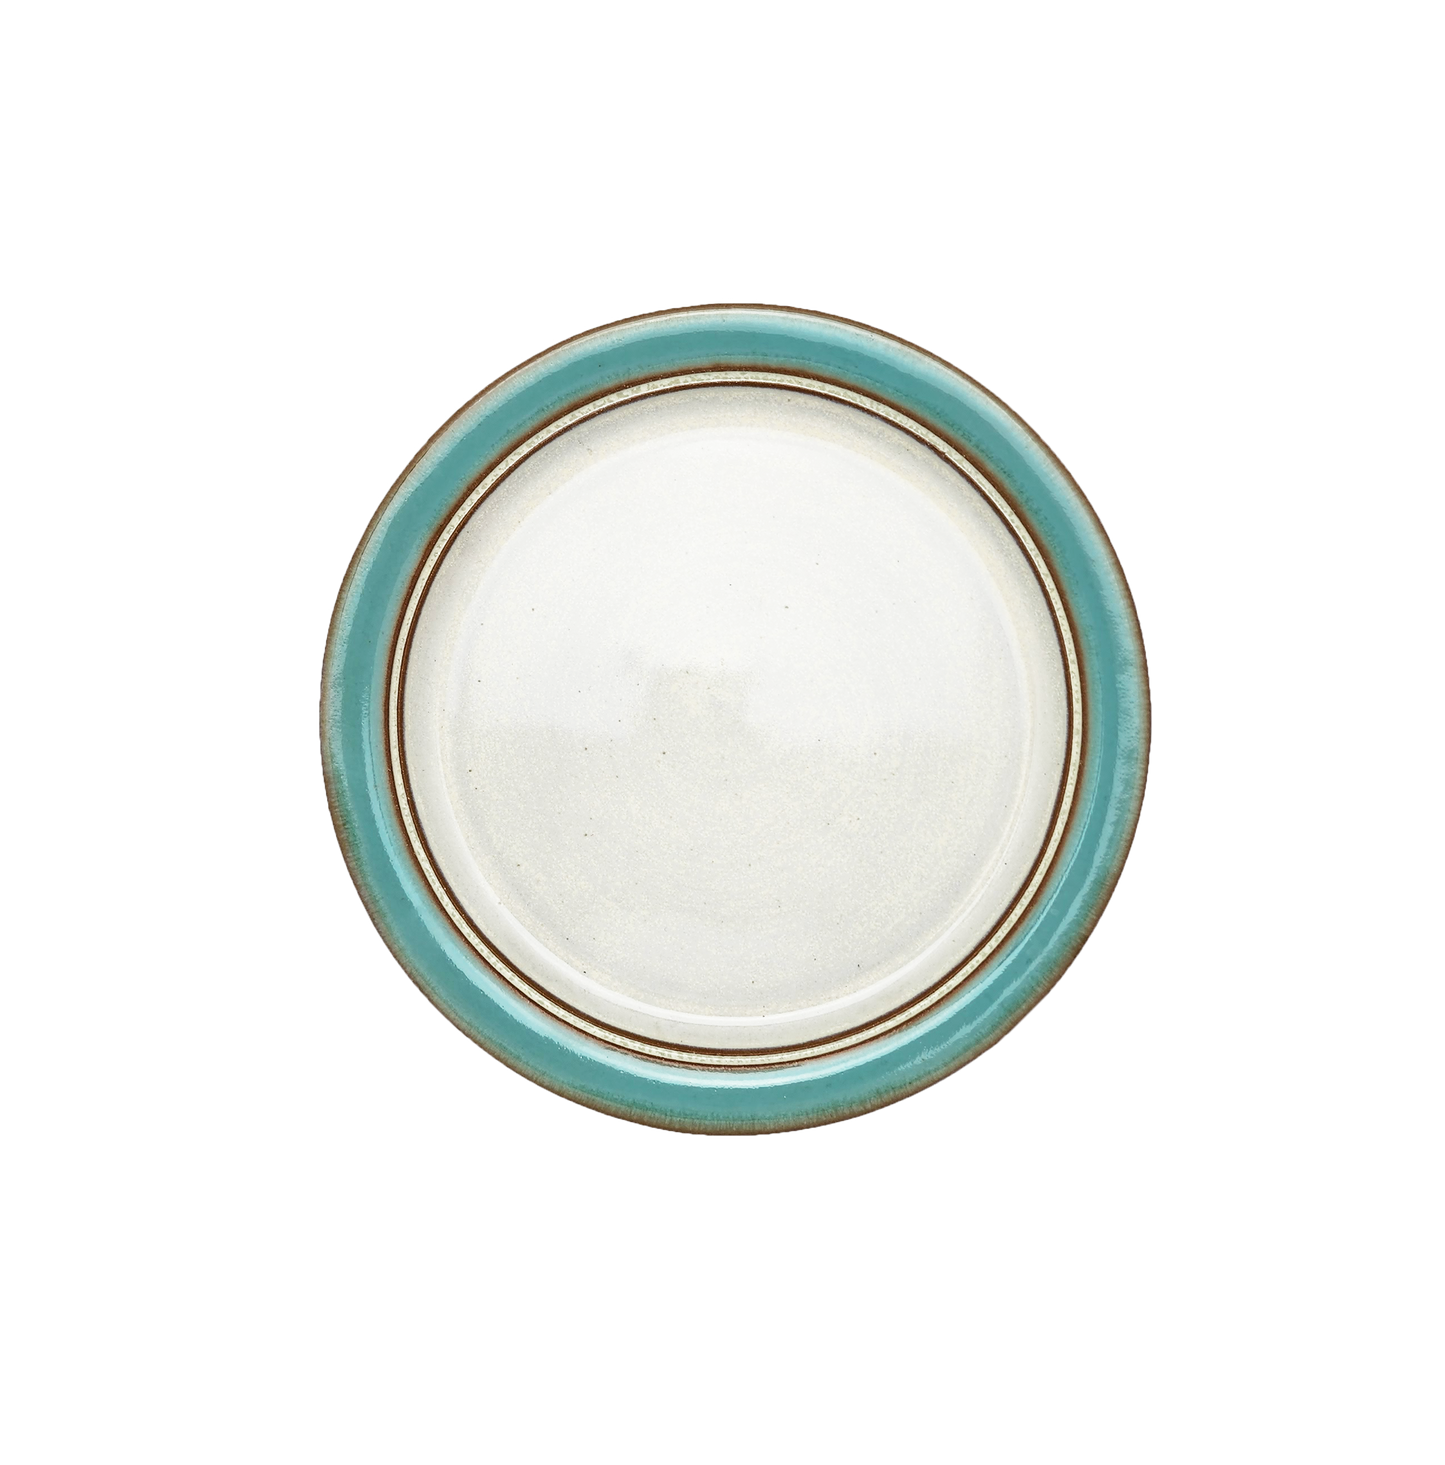 Image Description for Lunch Plate (8.5") in Sky Blue: A lunch plate from Clinton Pottery's Handmade Dinnerware Collection, featuring a serene and vibrant "Sky Blue" glaze. The 8.5-inch plate displays a glossy finish with tones reminiscent of a bright, sunny day. Its versatile size is ideal for serving smaller meals or appetizers with a hint of peaceful allure.